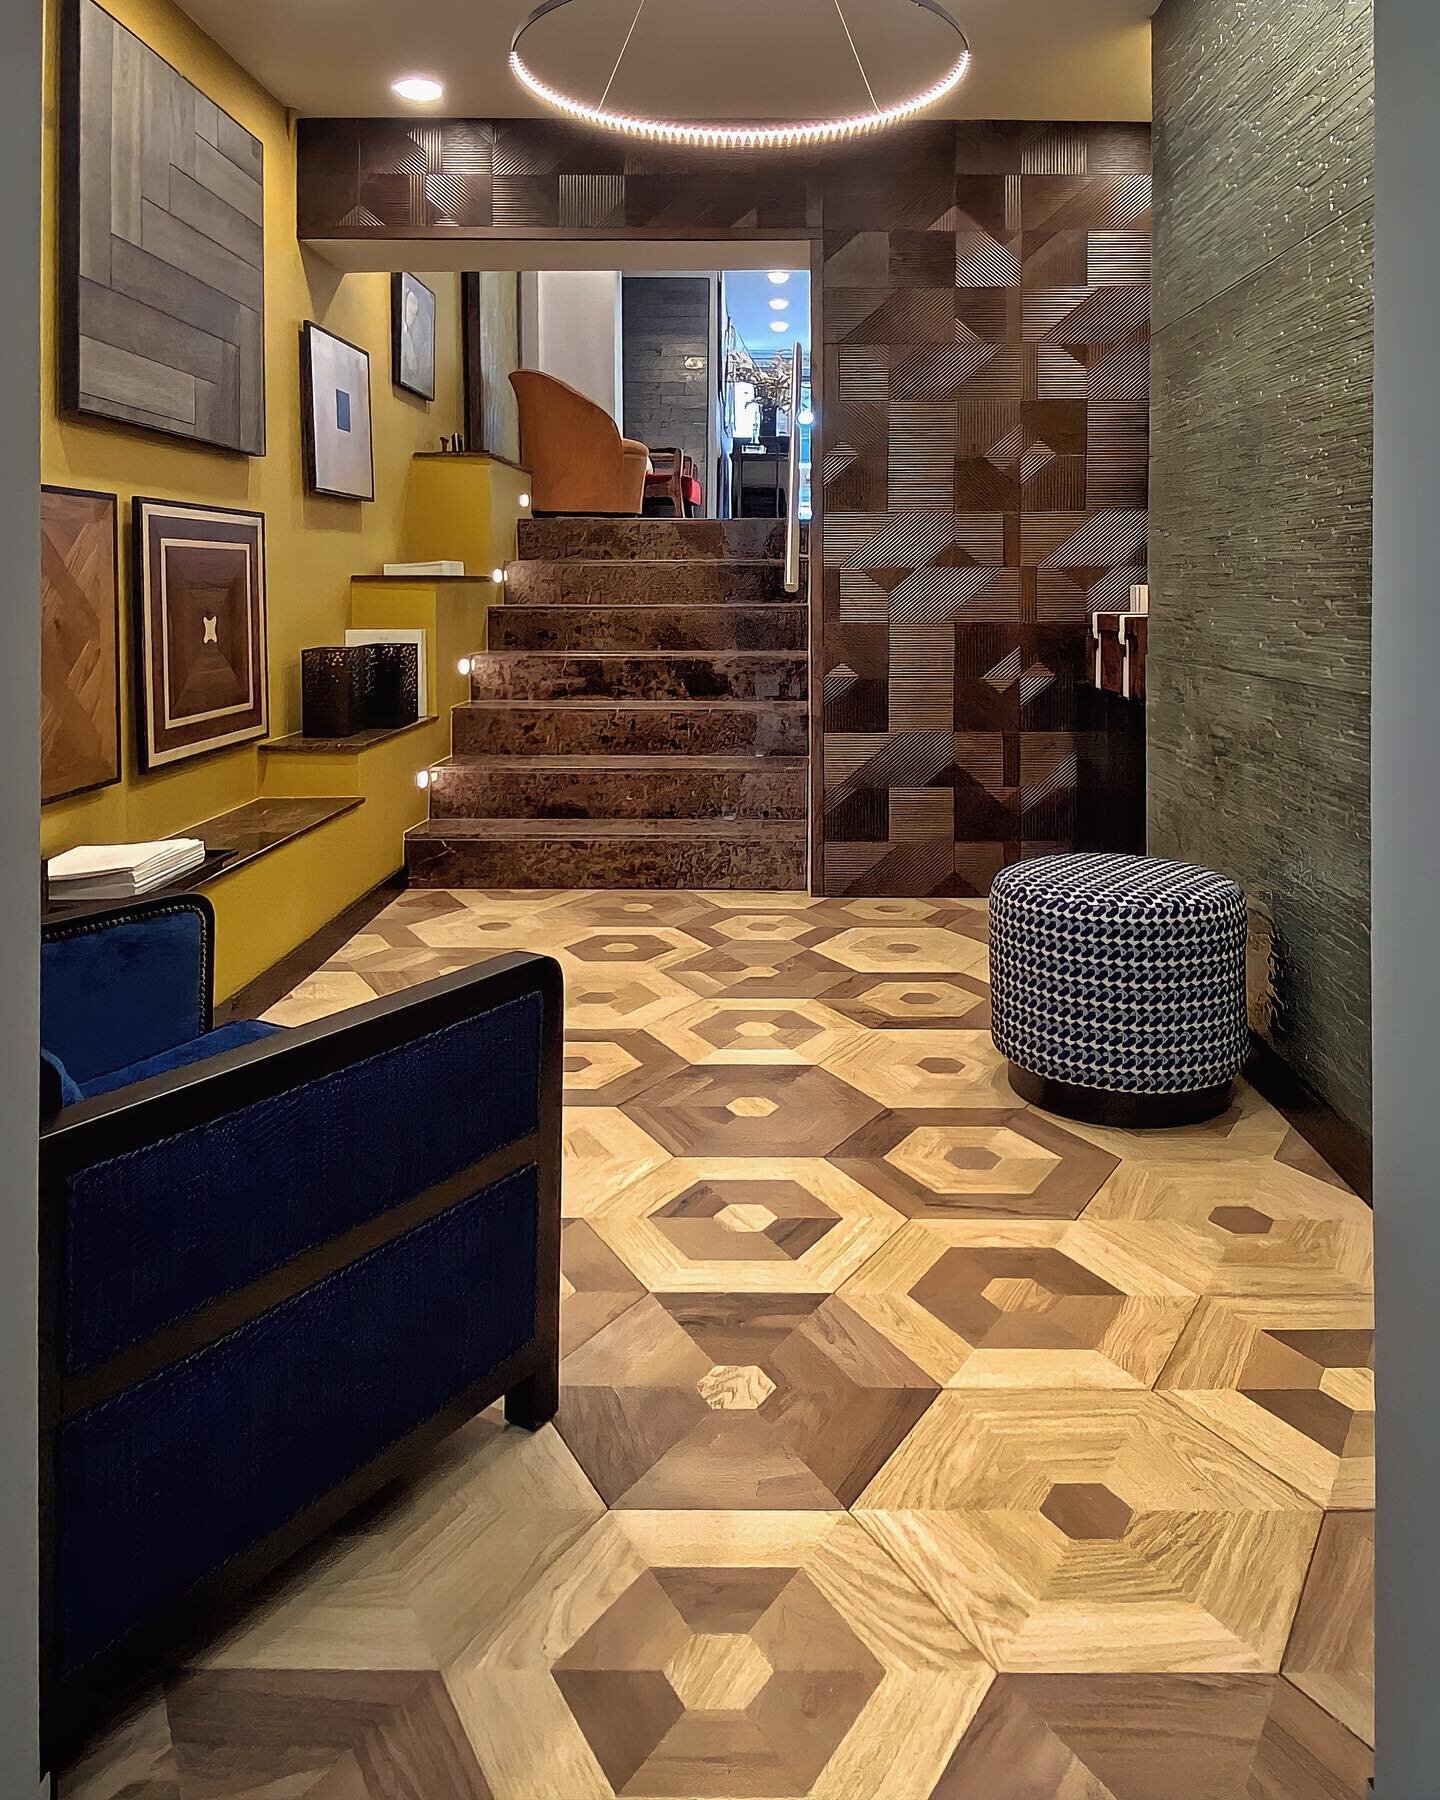 Step into a world of design &amp; inspiration. Master artisans for over 60 years, Italian made @piccardiliving&rsquo;s heritage-flooring collection and bespoke services are now available at @decorumestlondon&rsquo;s King&rsquo;s Road showroom. #extra